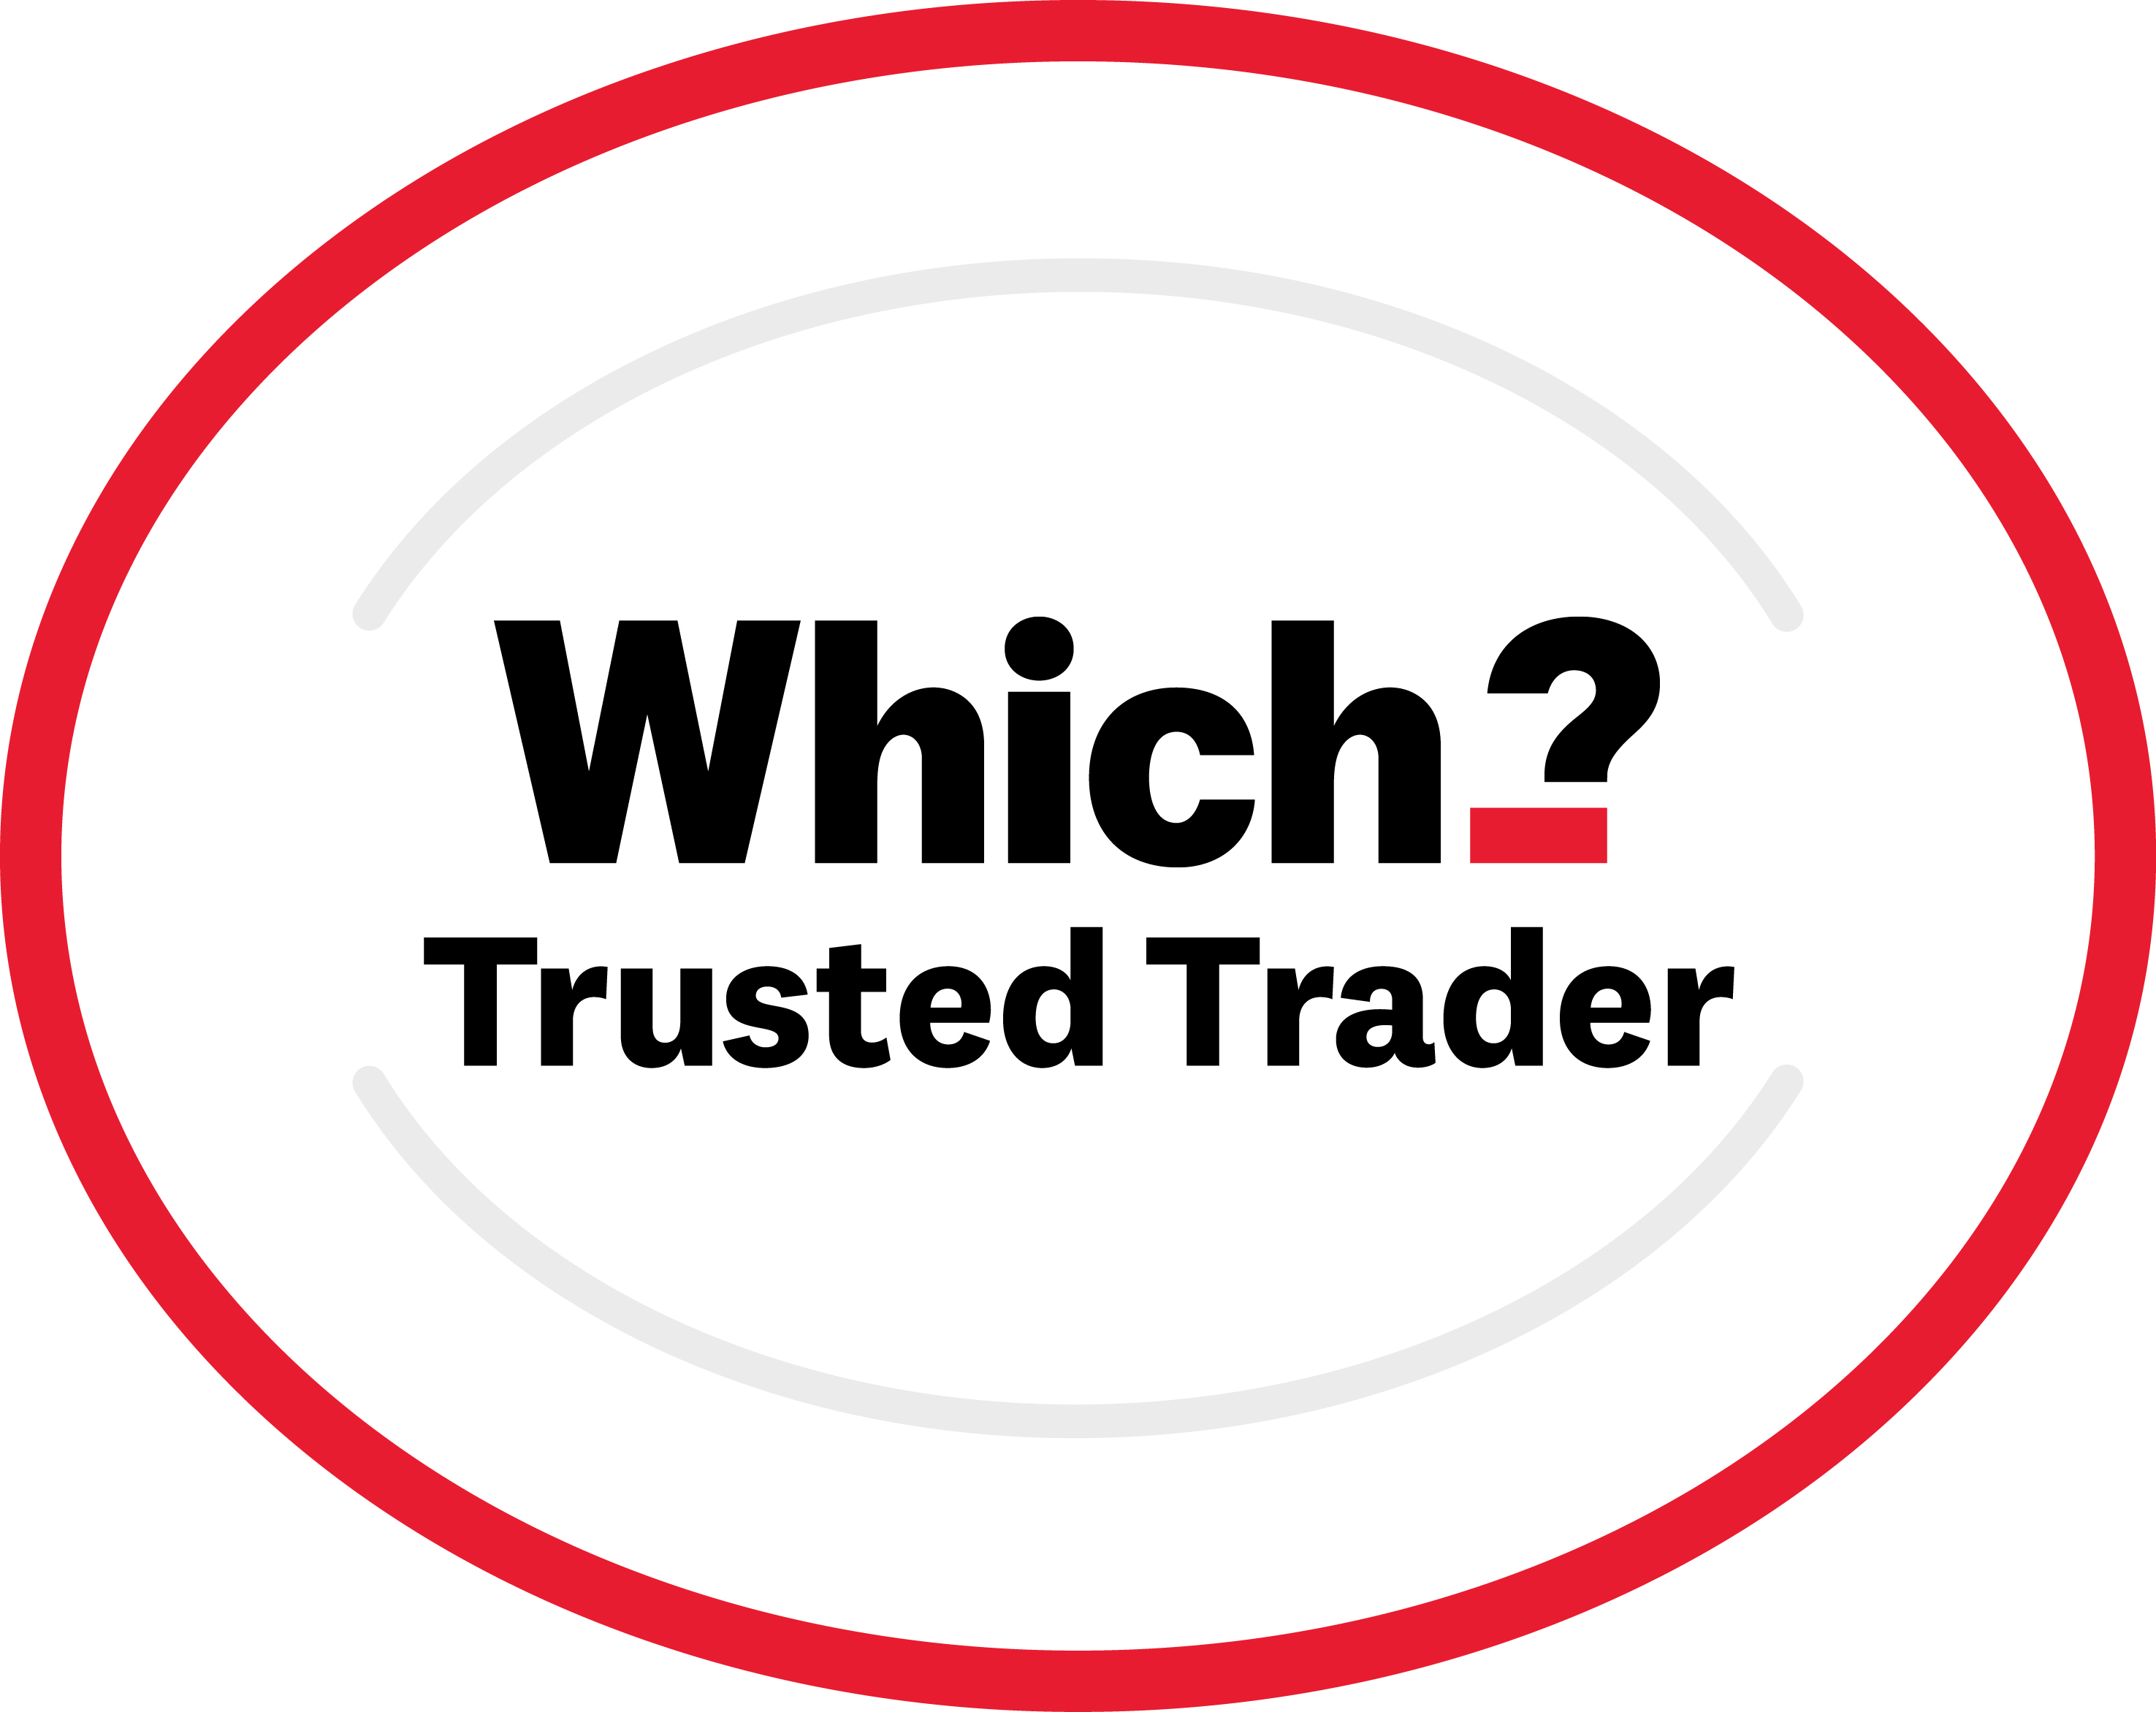 Electric Underfloor Heating Installers - Which Trusted Traders?